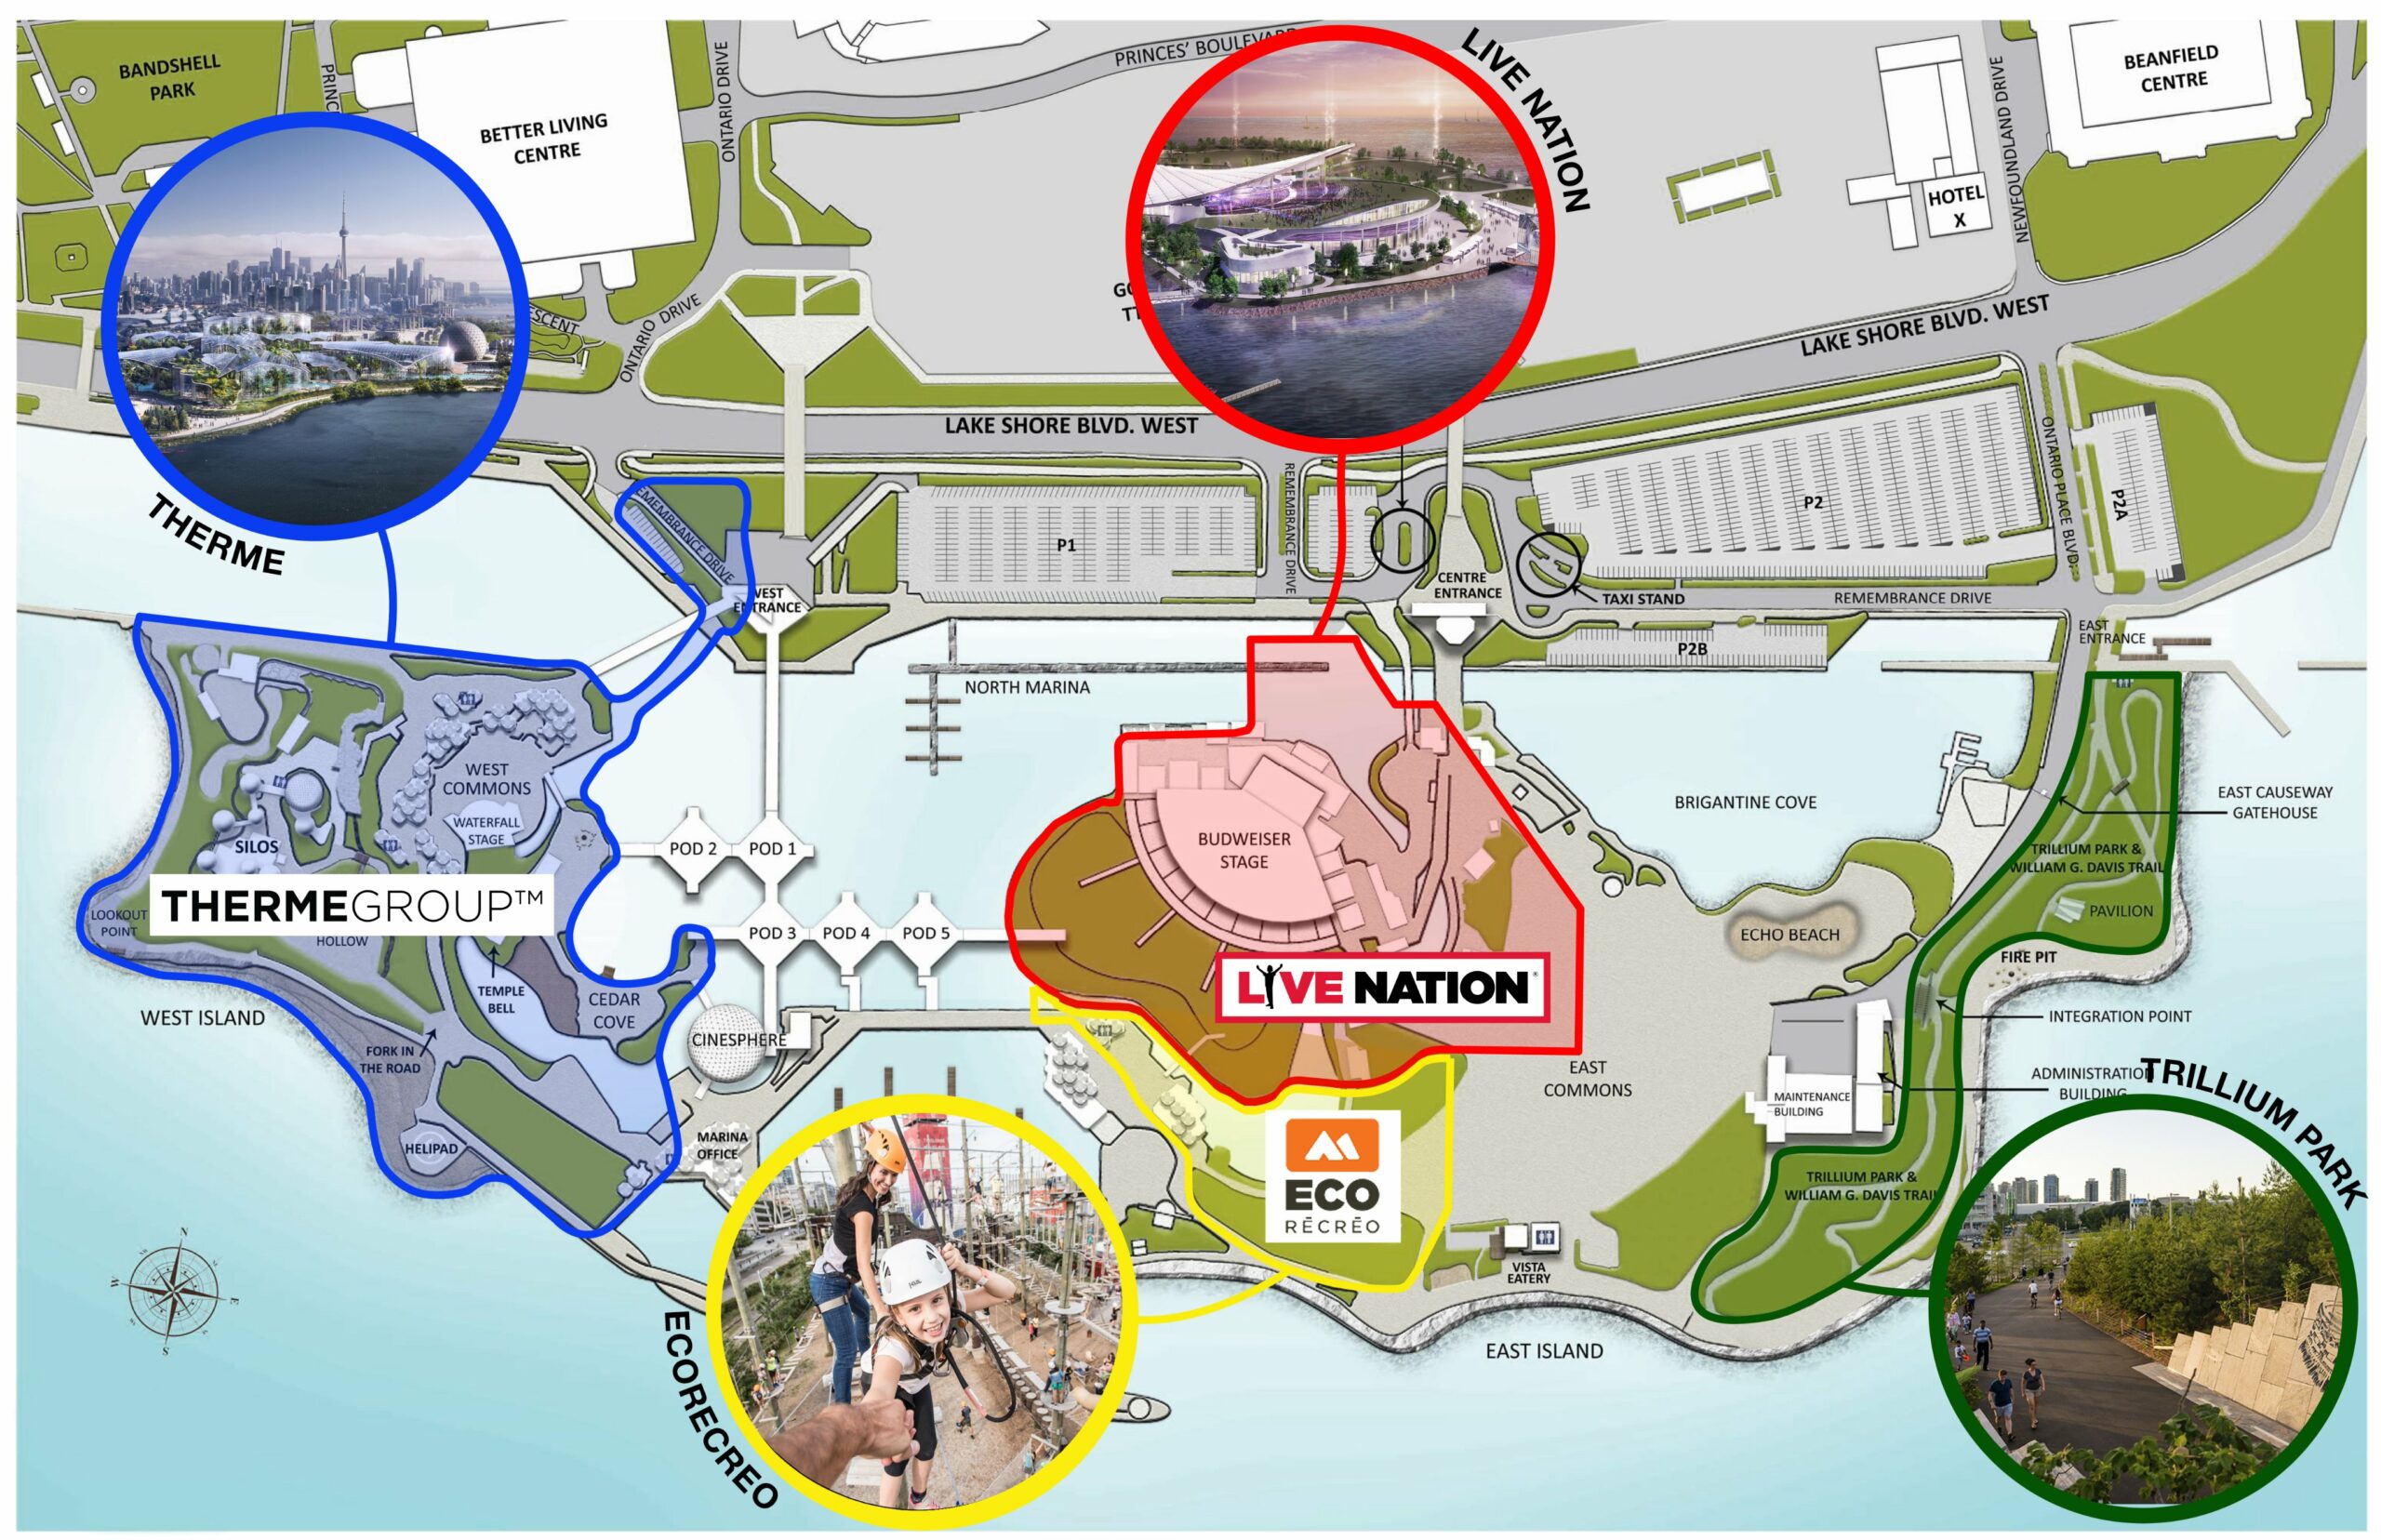 Ontario Place redevelopment plan unveiled, but details are scarce